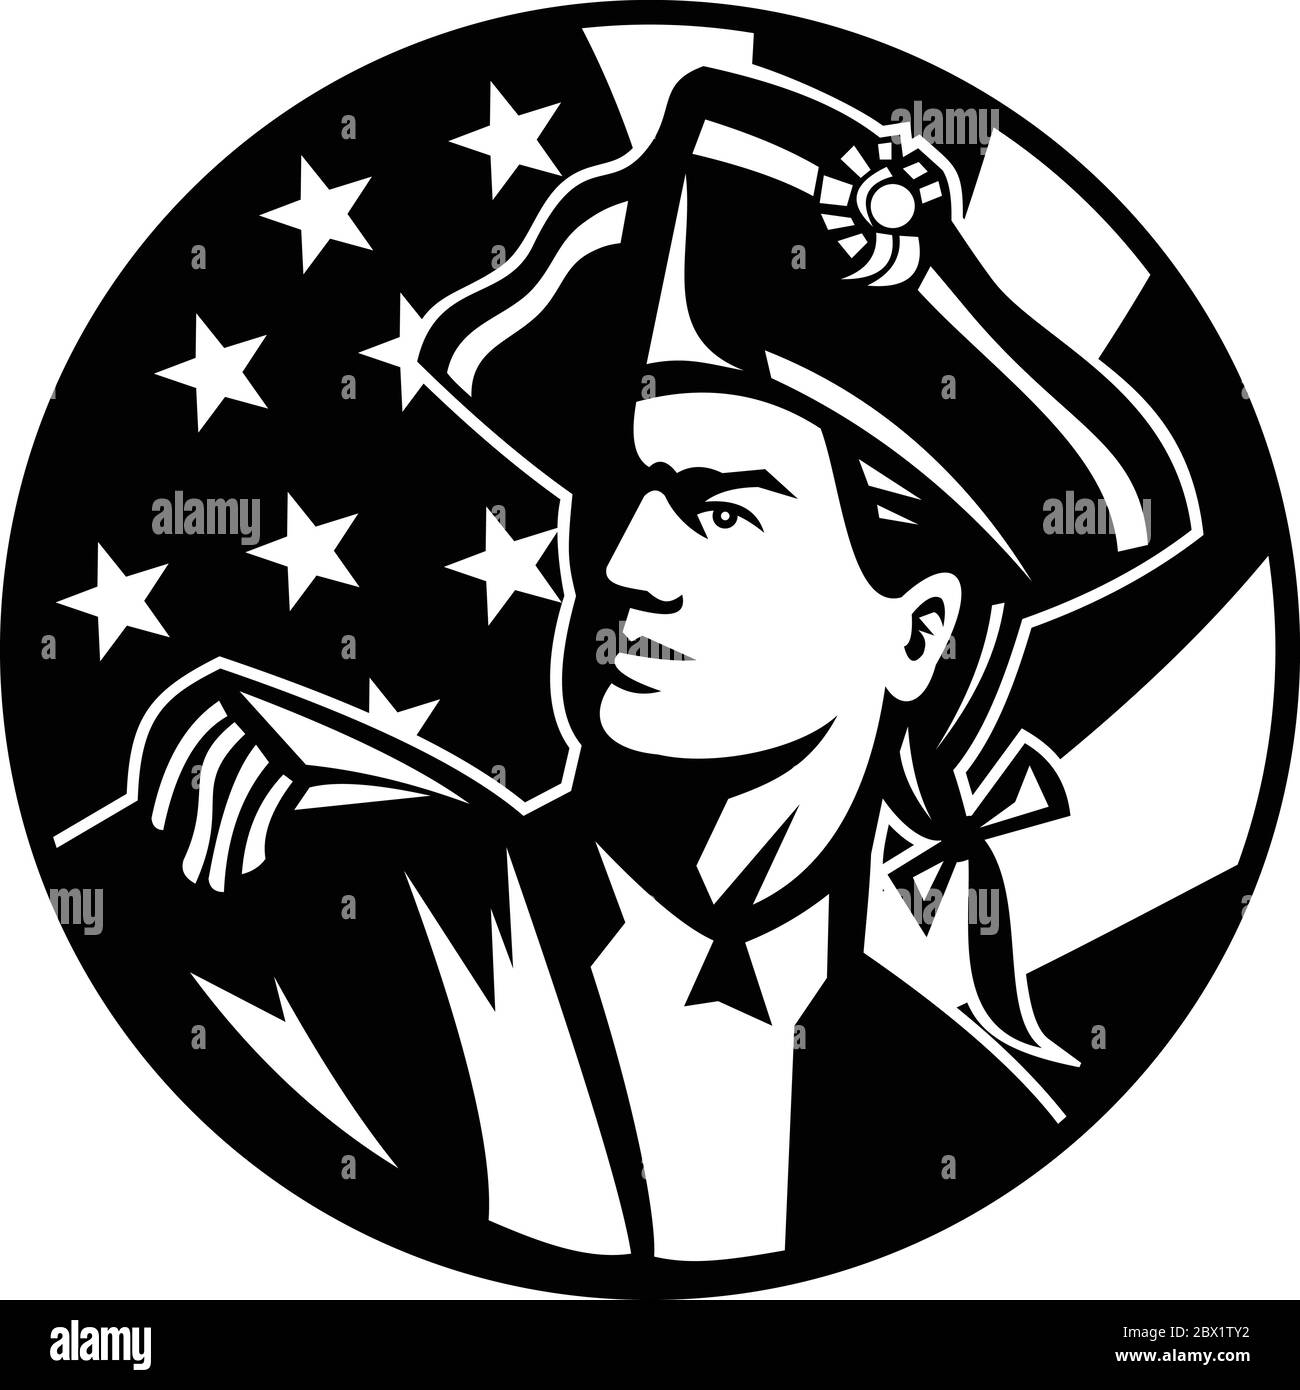 Black and white illustration of an American Patriot revolutionary soldier looking up with USA star spangled banner stars and stripes flag in backgroun Stock Vector